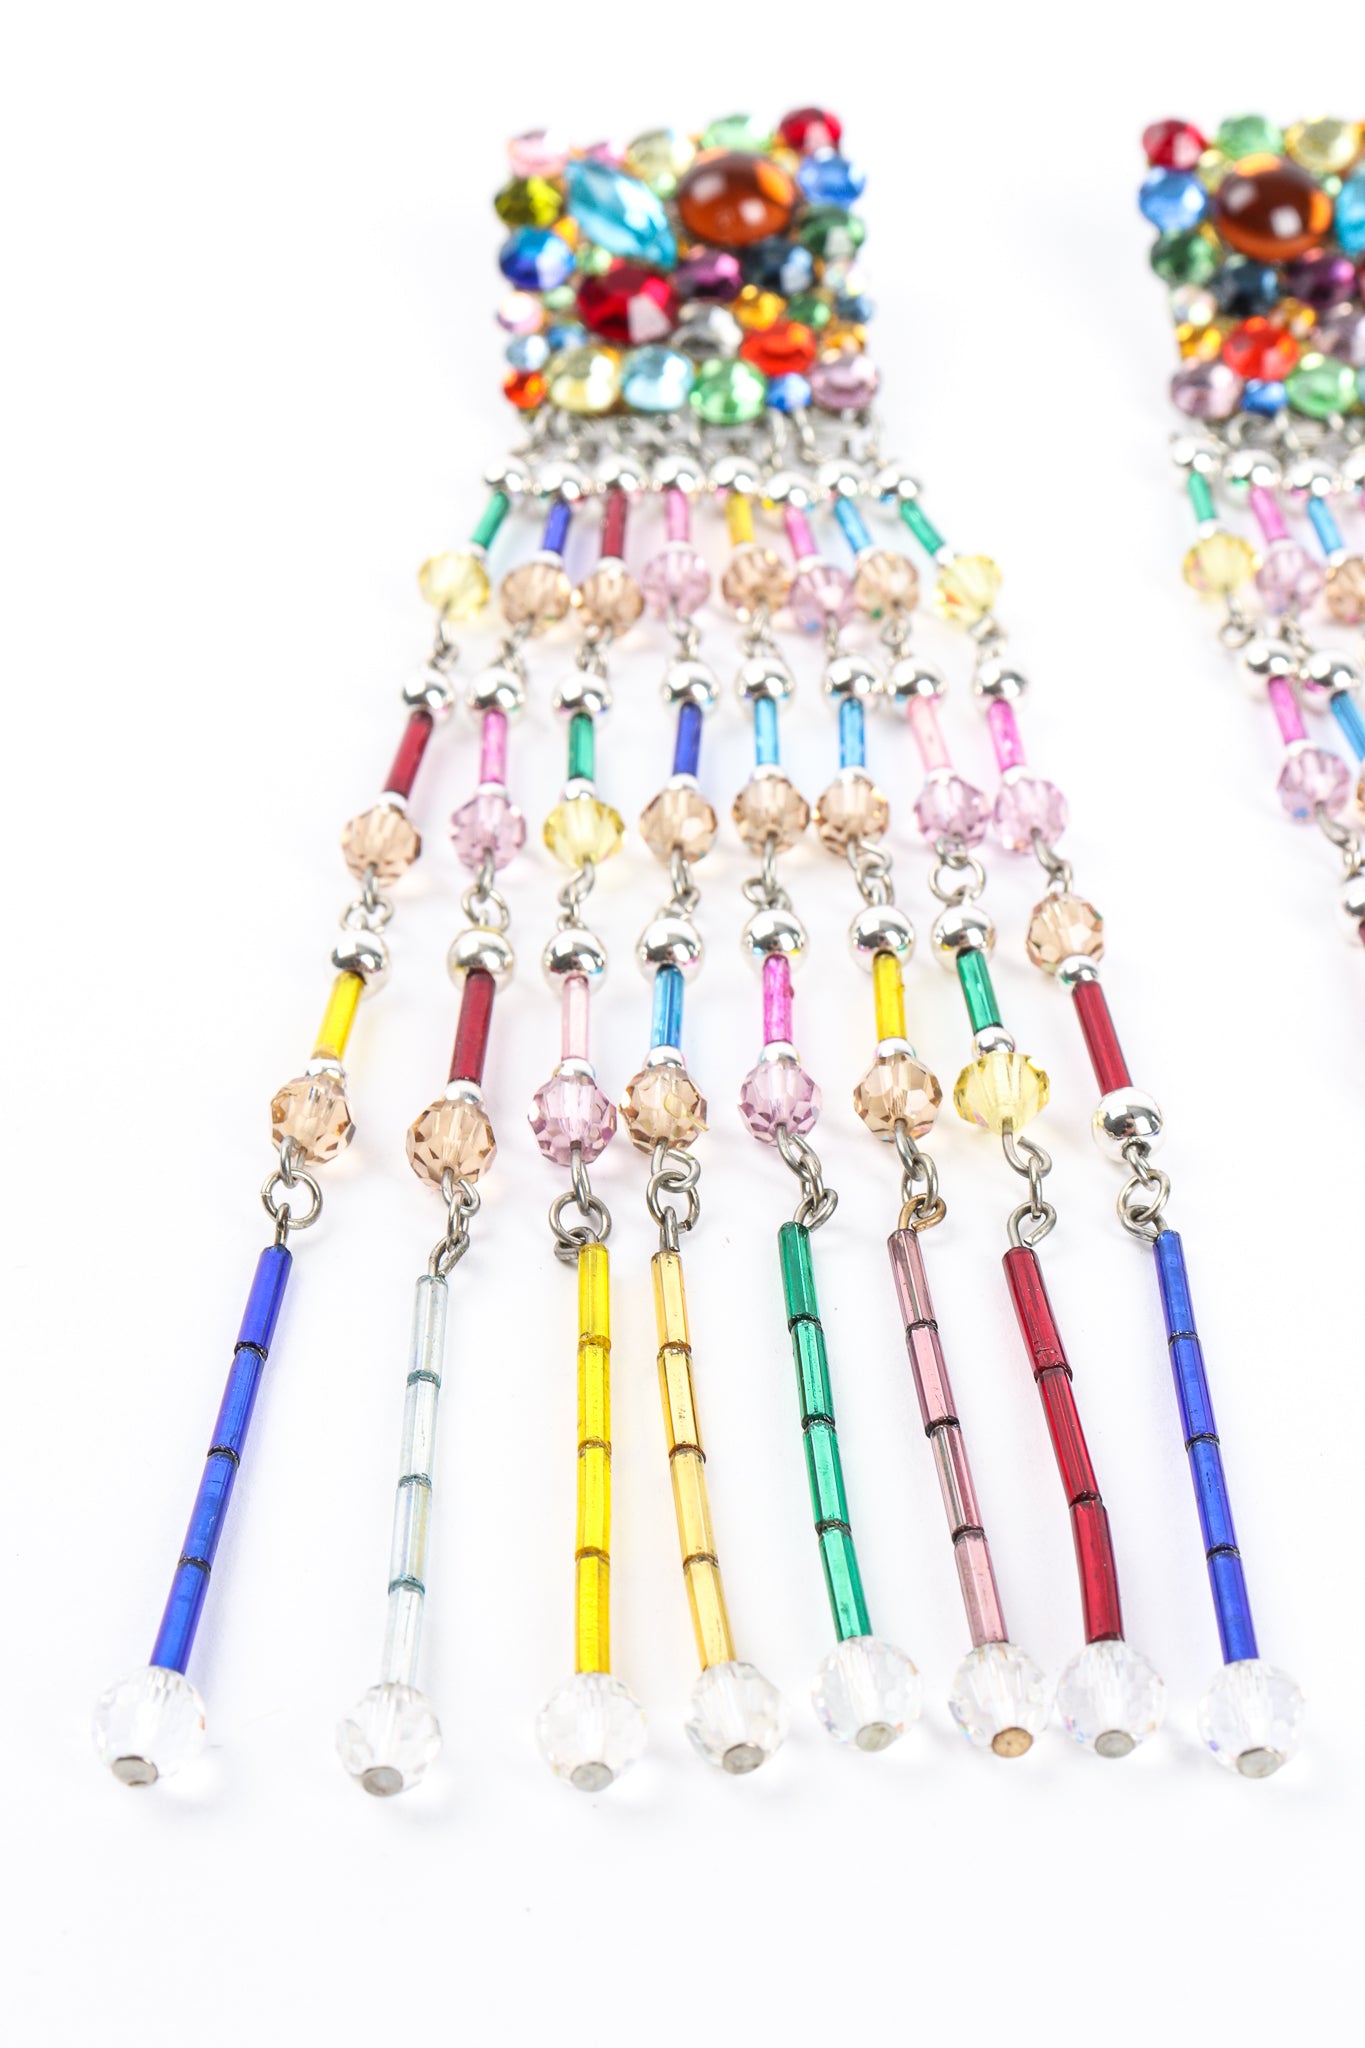 Vintage Confetti Glass Bead Fringe Earrings detail at Recess Los Angeles